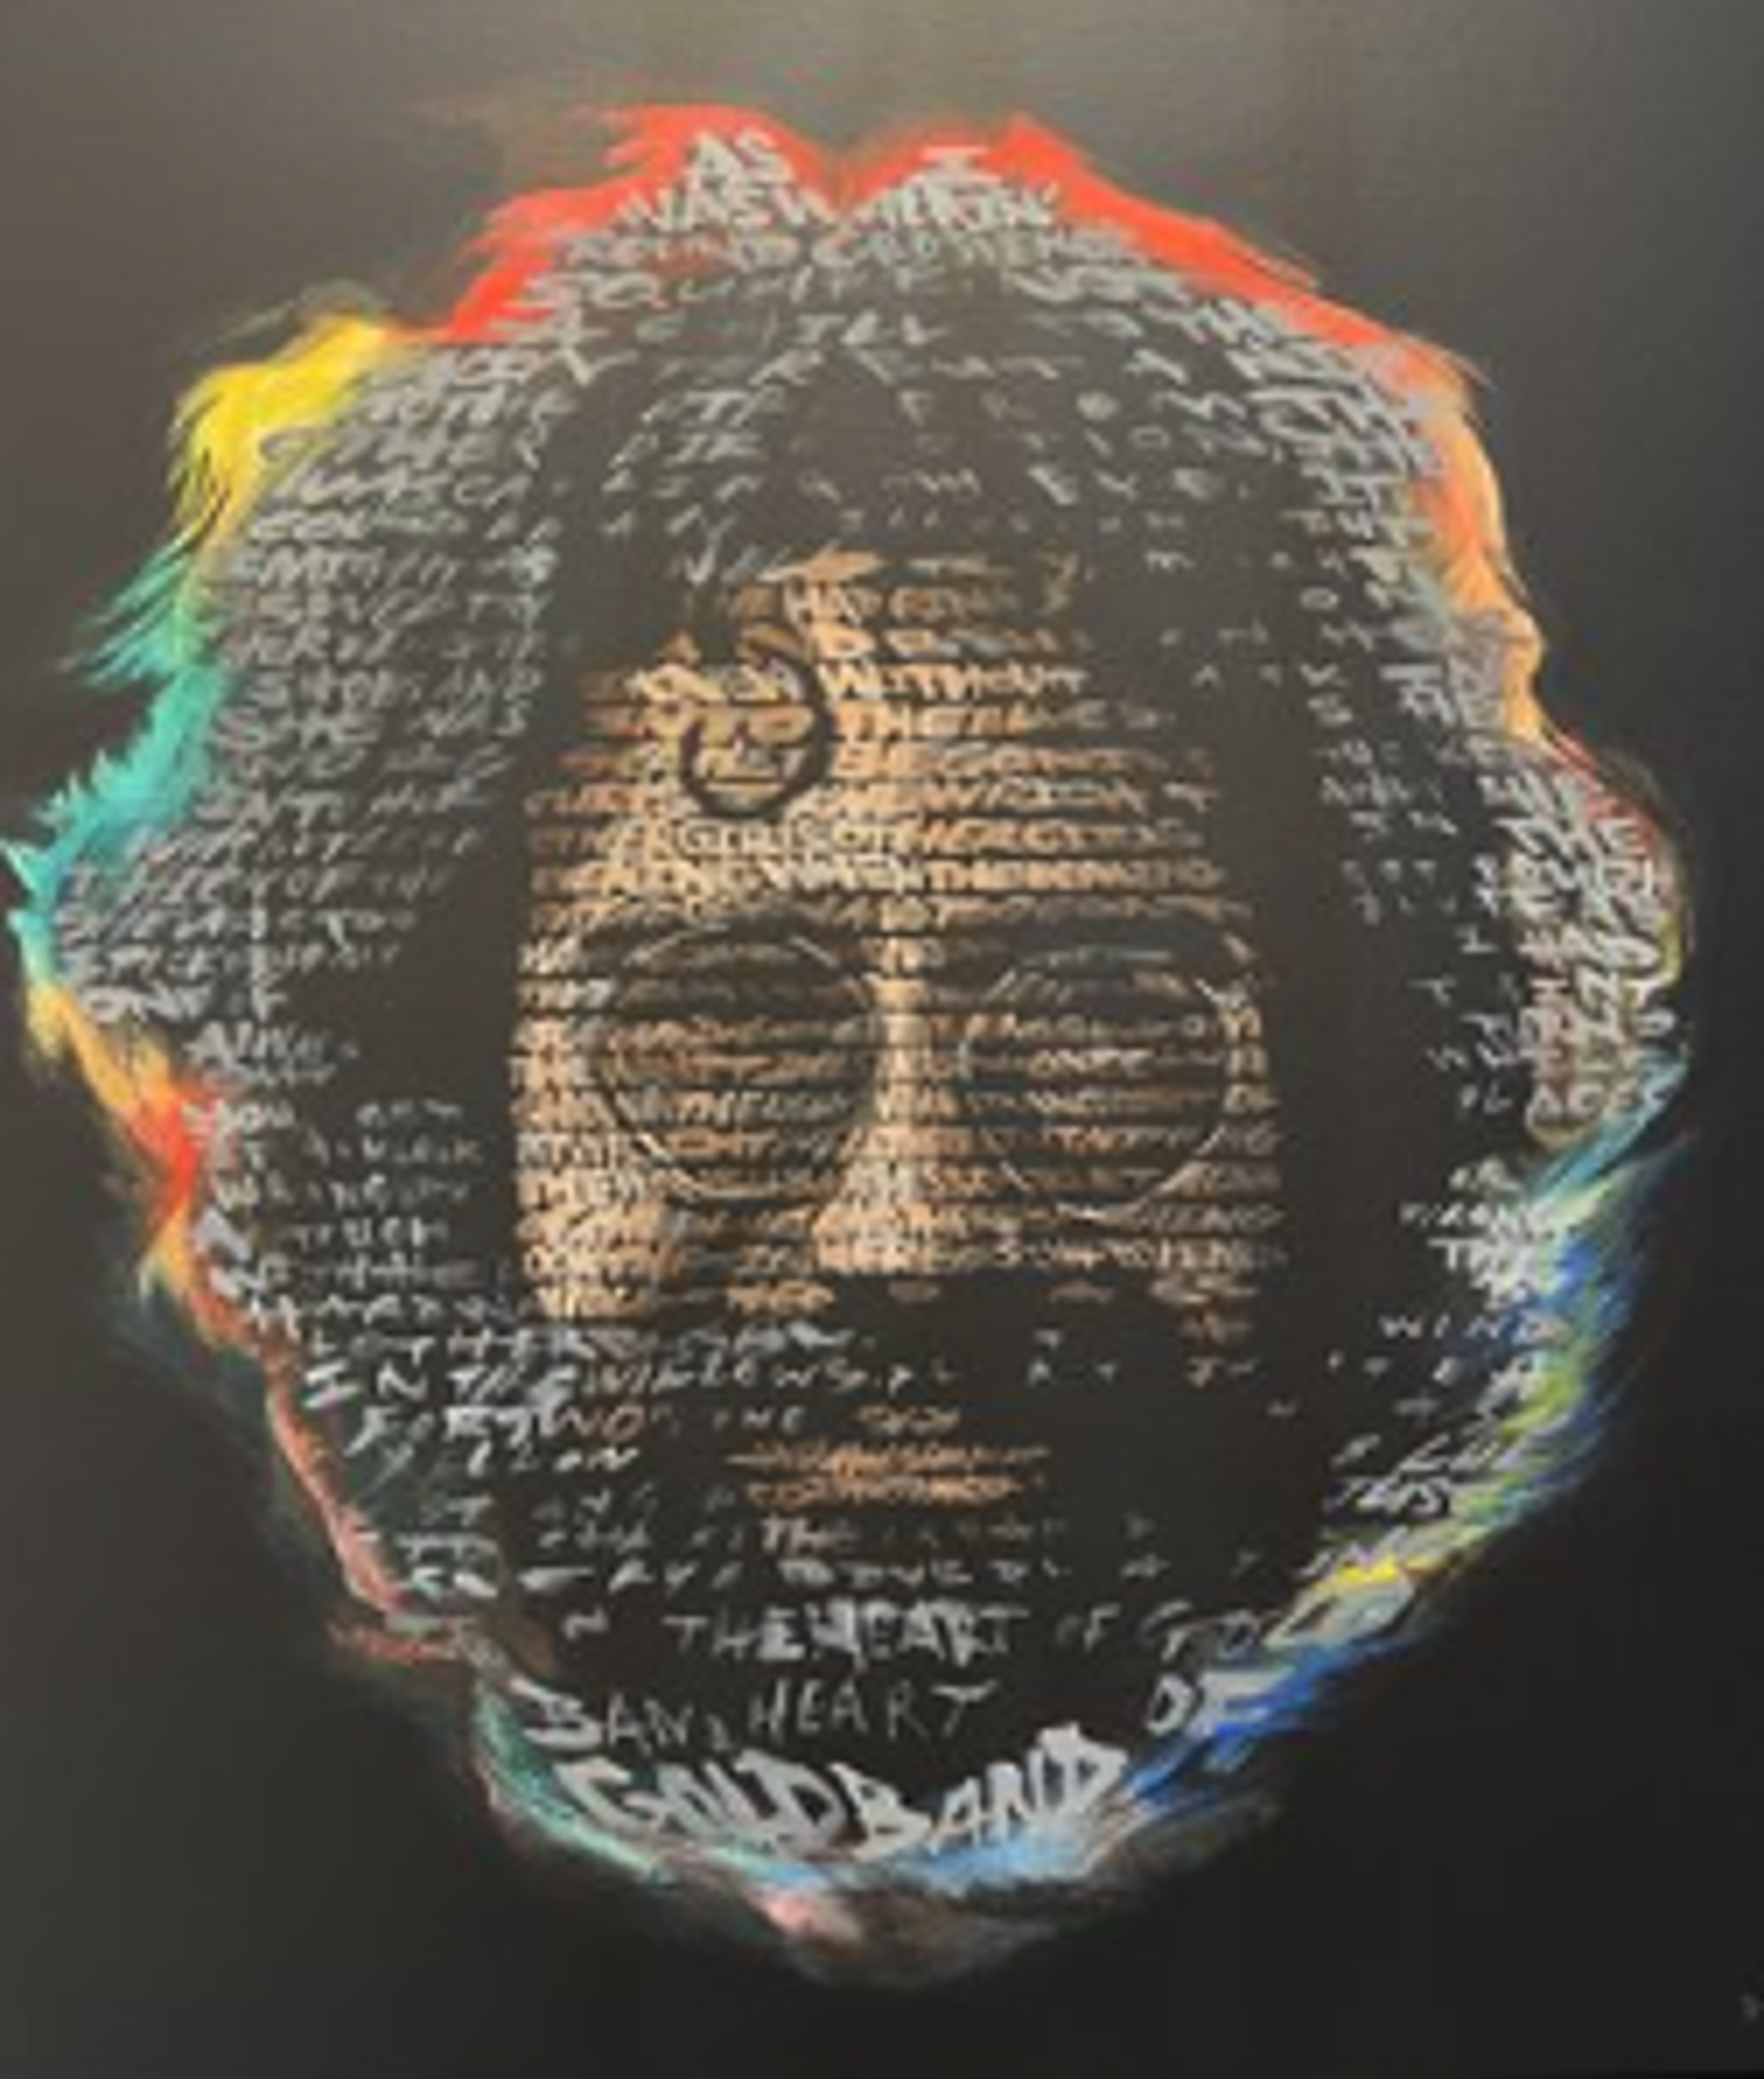 Jerry Garcia ('Scarlet Begonias' By The Grateful Dead) by David Hollier